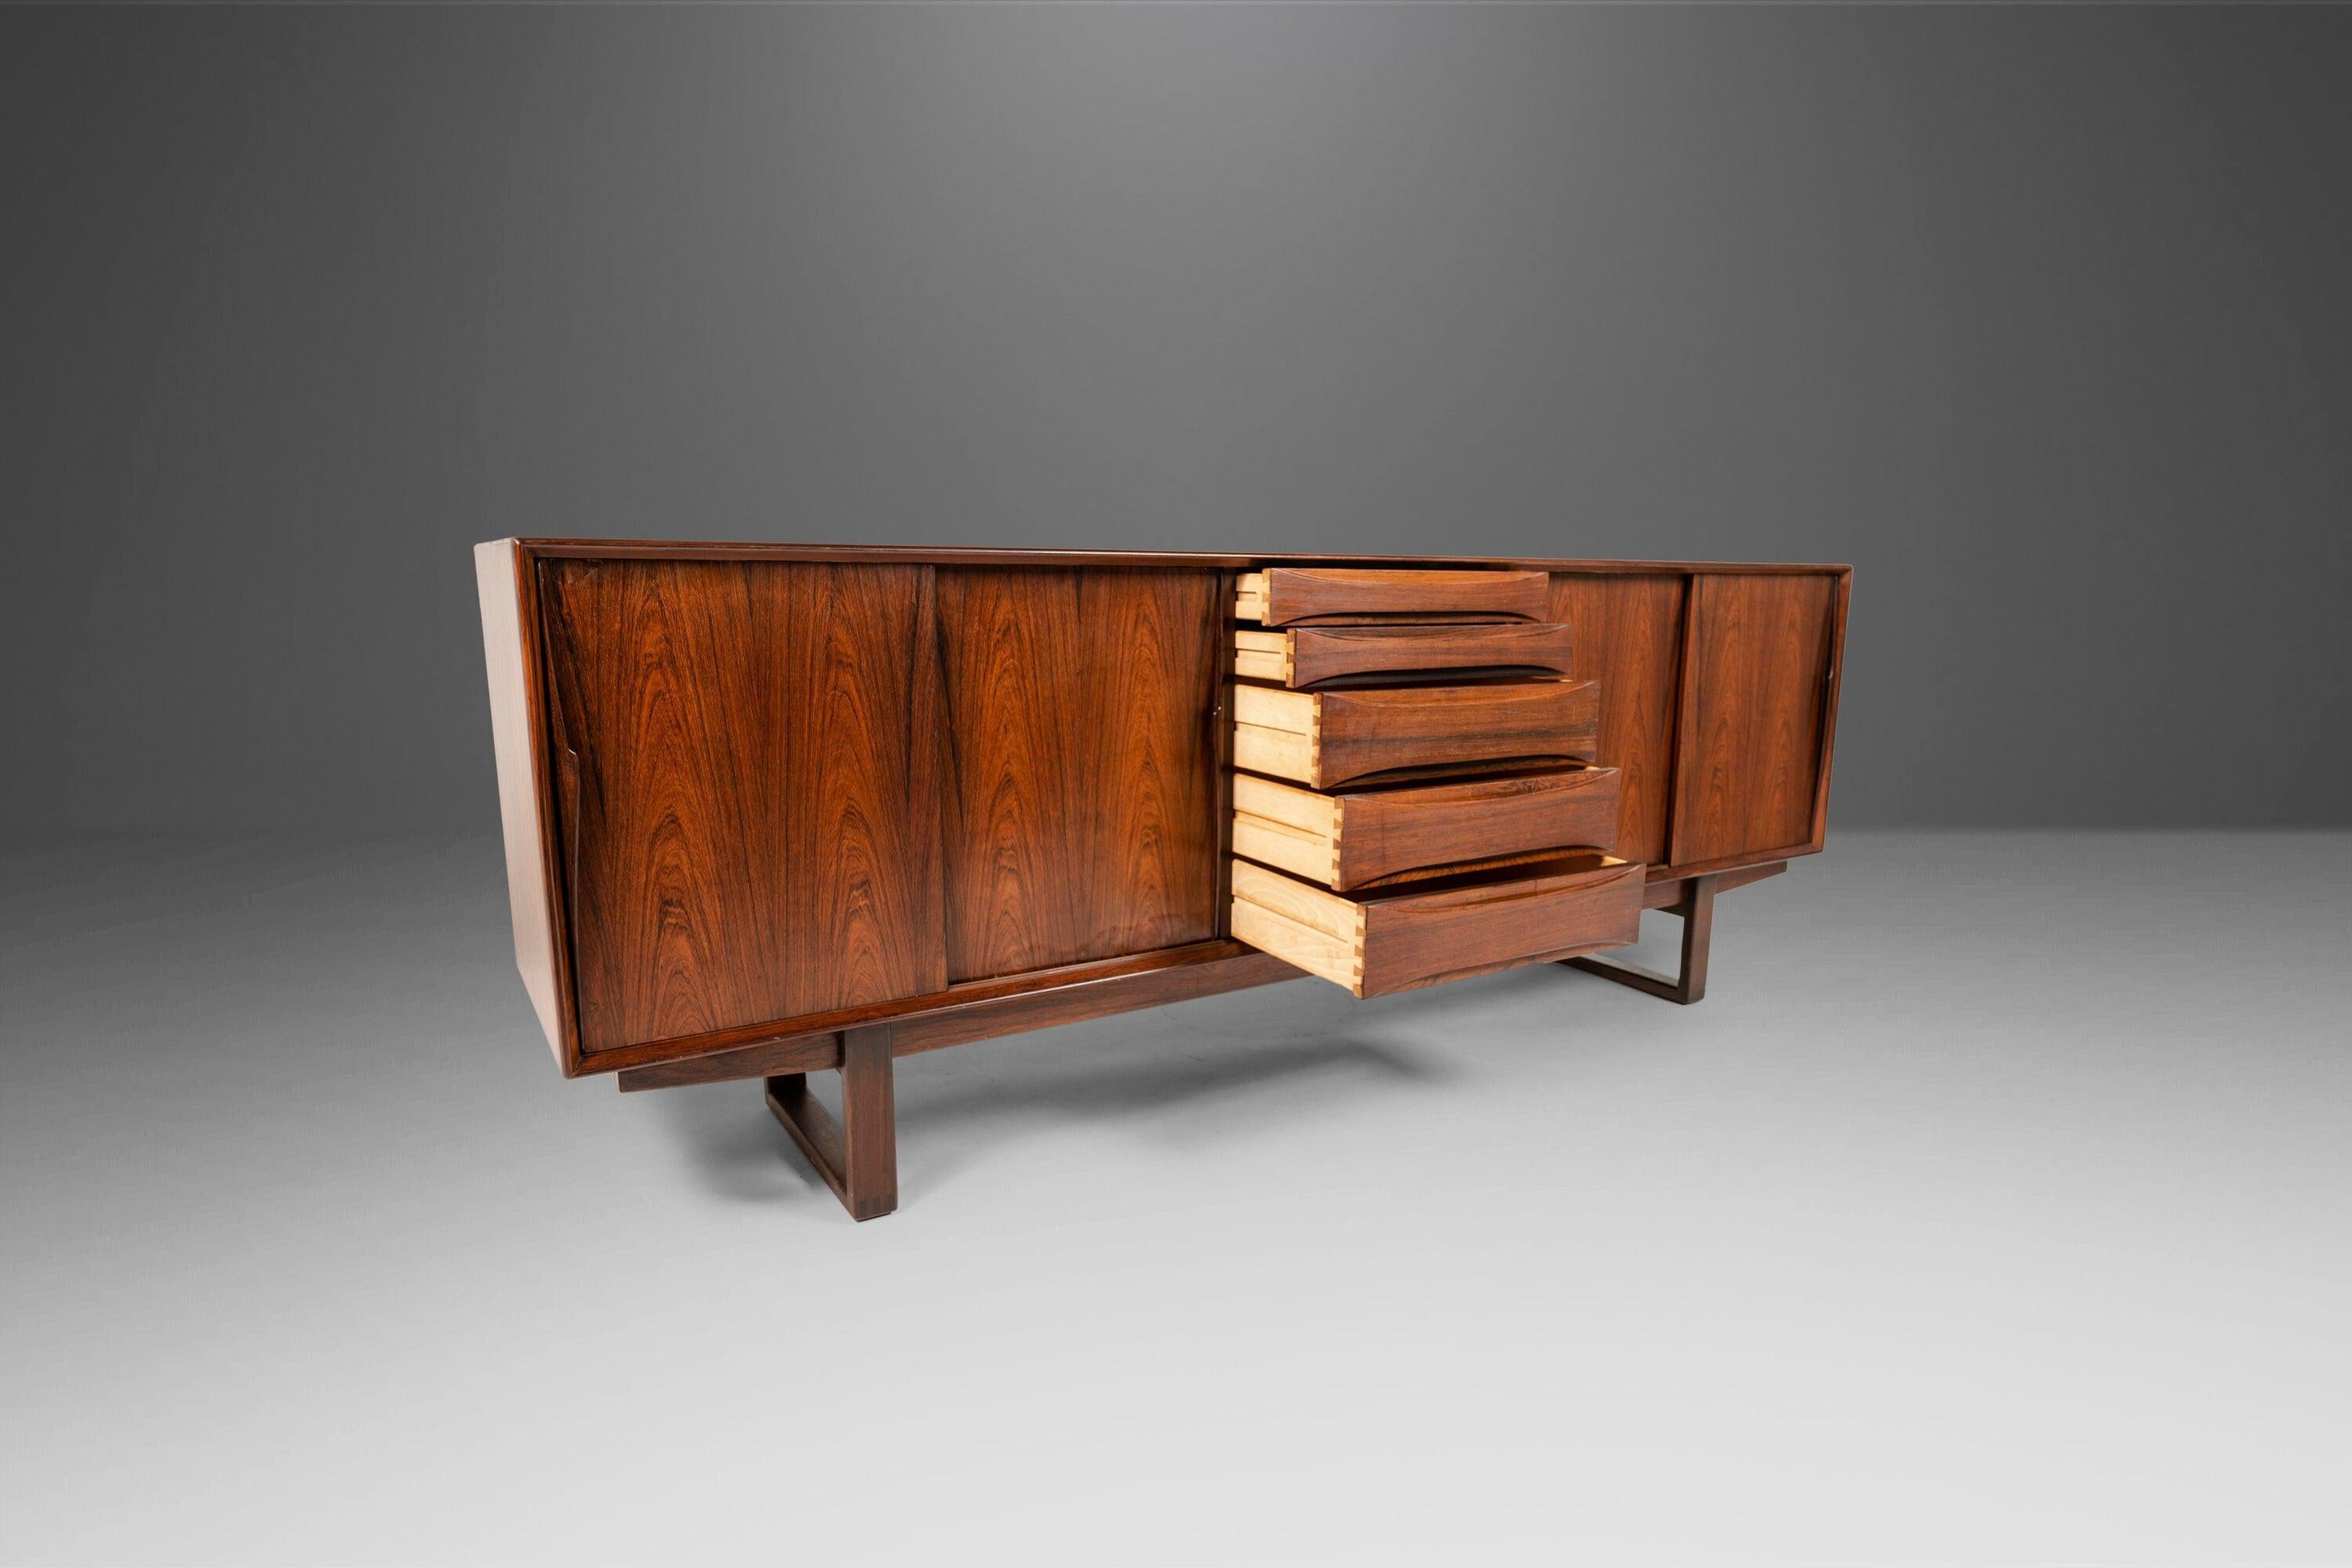 Danish Modern Sled Base Rosewood Credenza Attributed to Arne Vodder, c. 1960's In Good Condition For Sale In Deland, FL